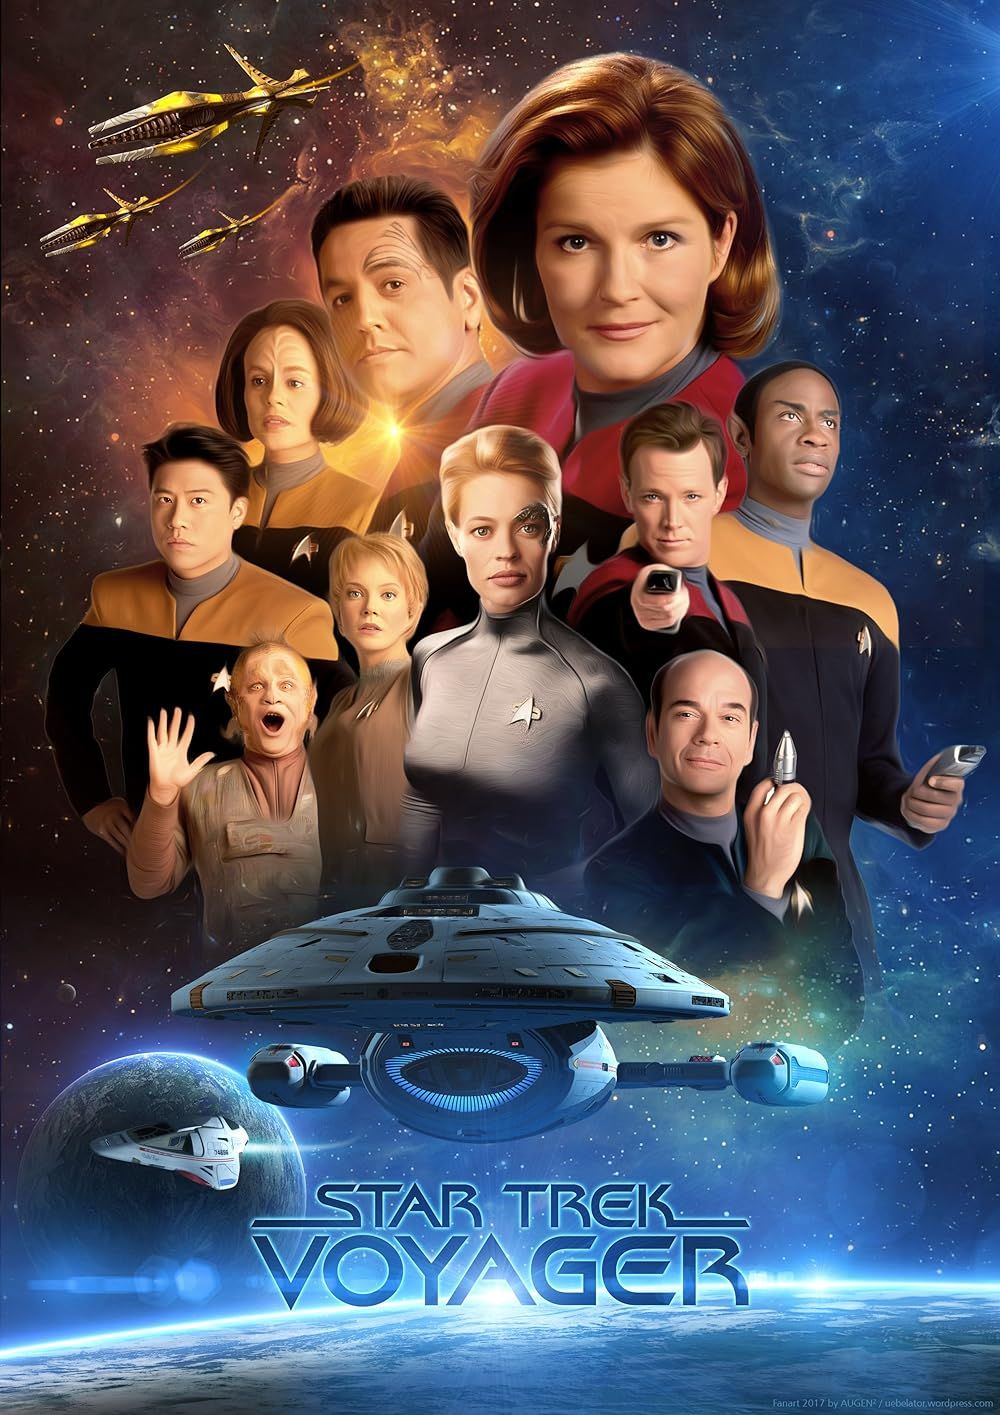 The Cast in a Star Trek Voyager Promo